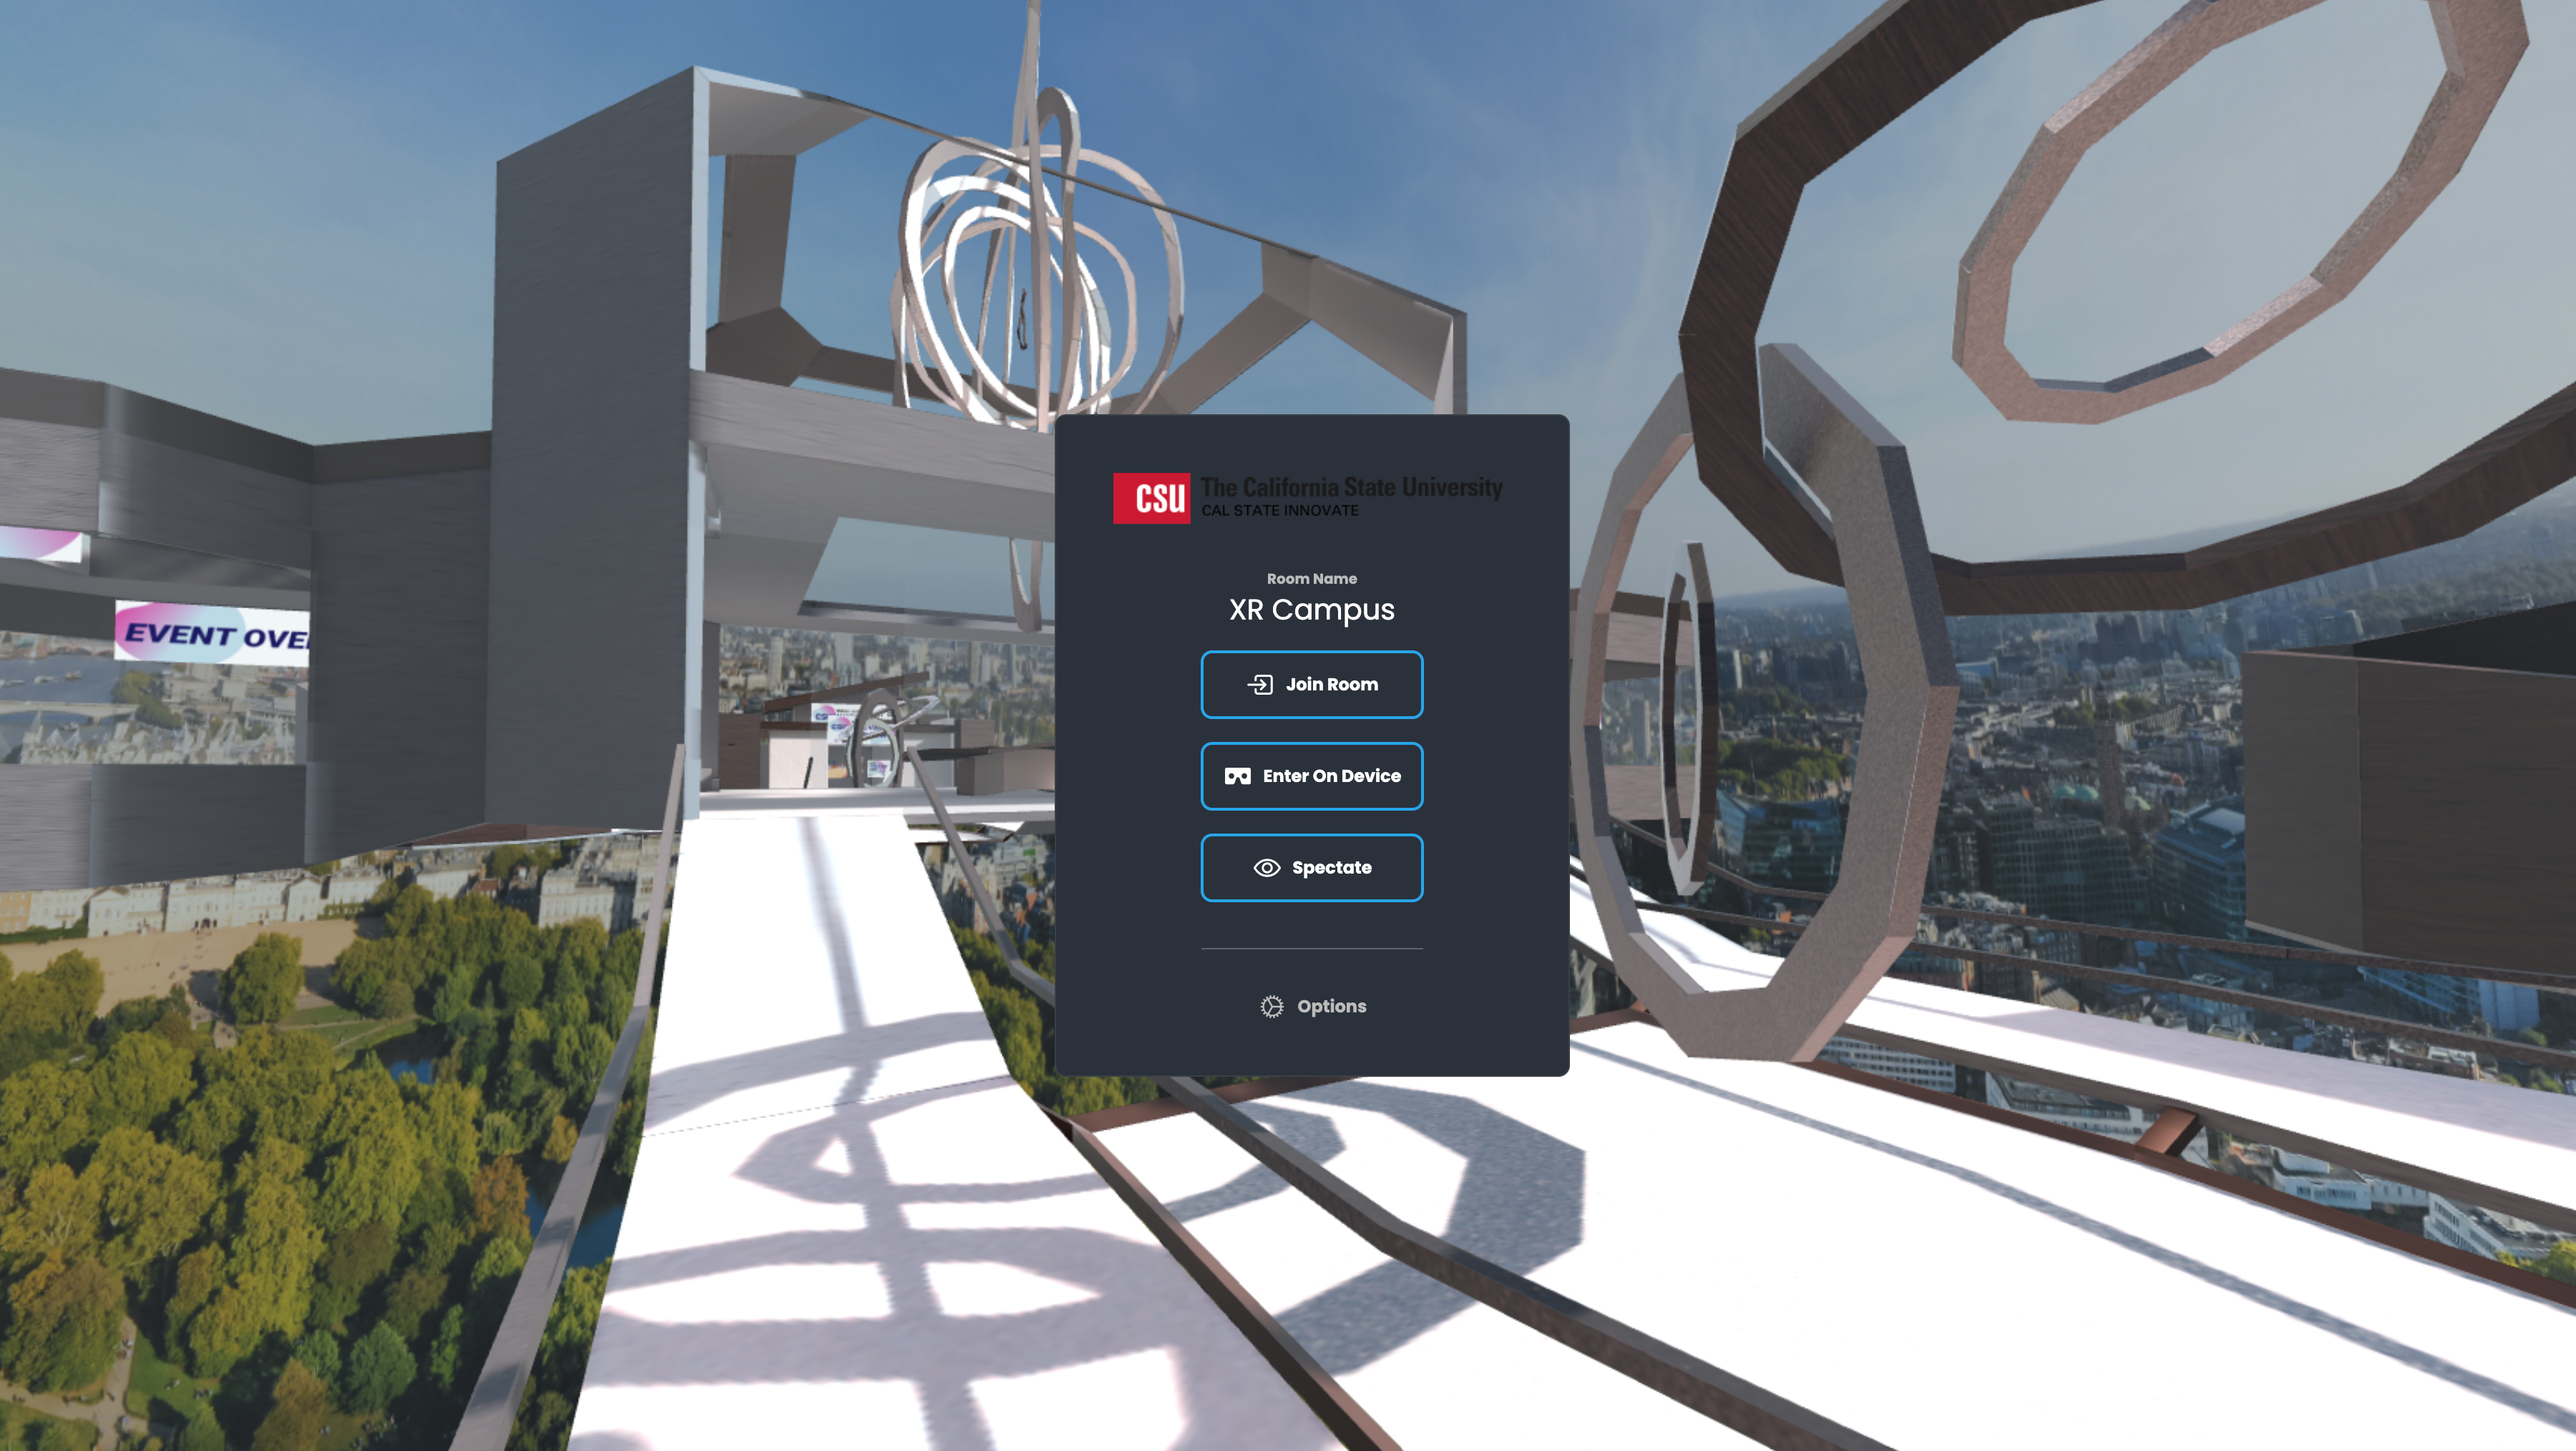 Screenshot of virtual sandbox designed to explore Extended Reality (XR) environments.